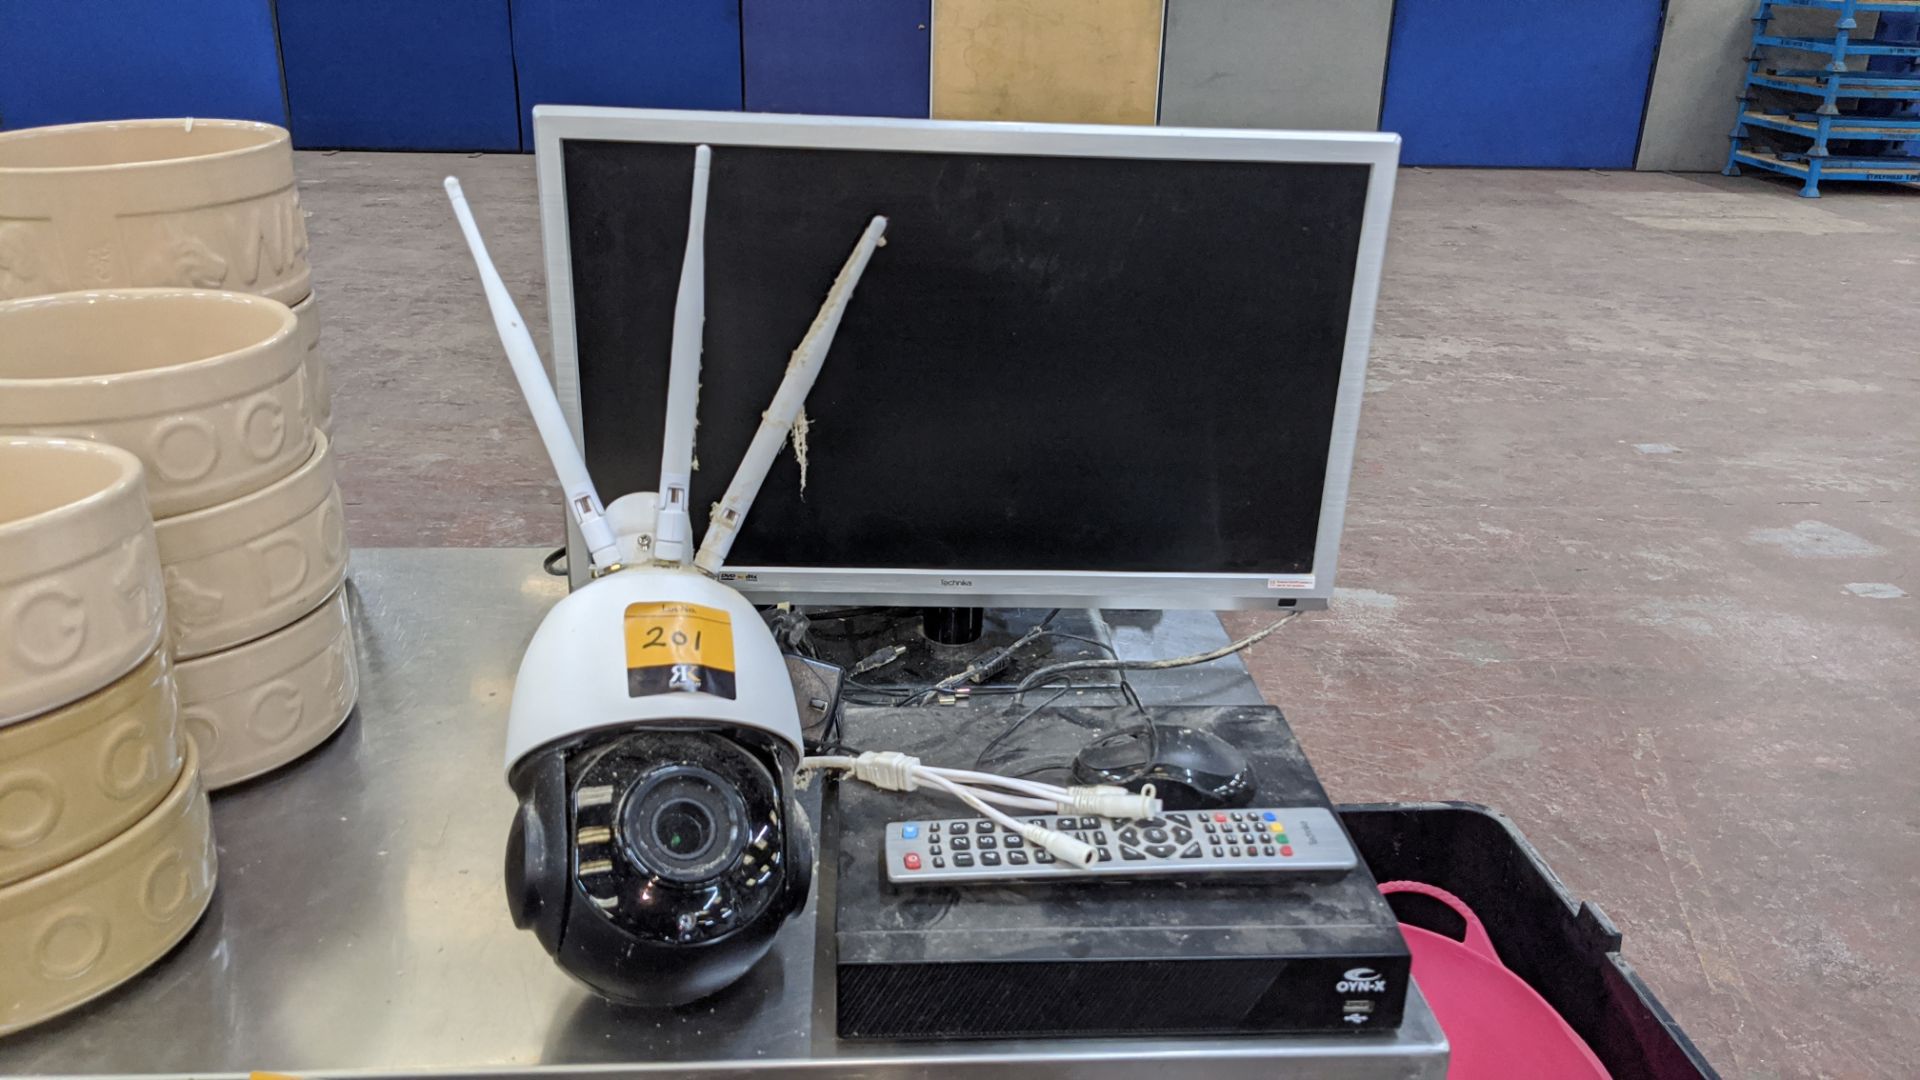 Oyn-X CCTV equipment comprising hard drive recorder, movable camera & monitor - Image 2 of 6